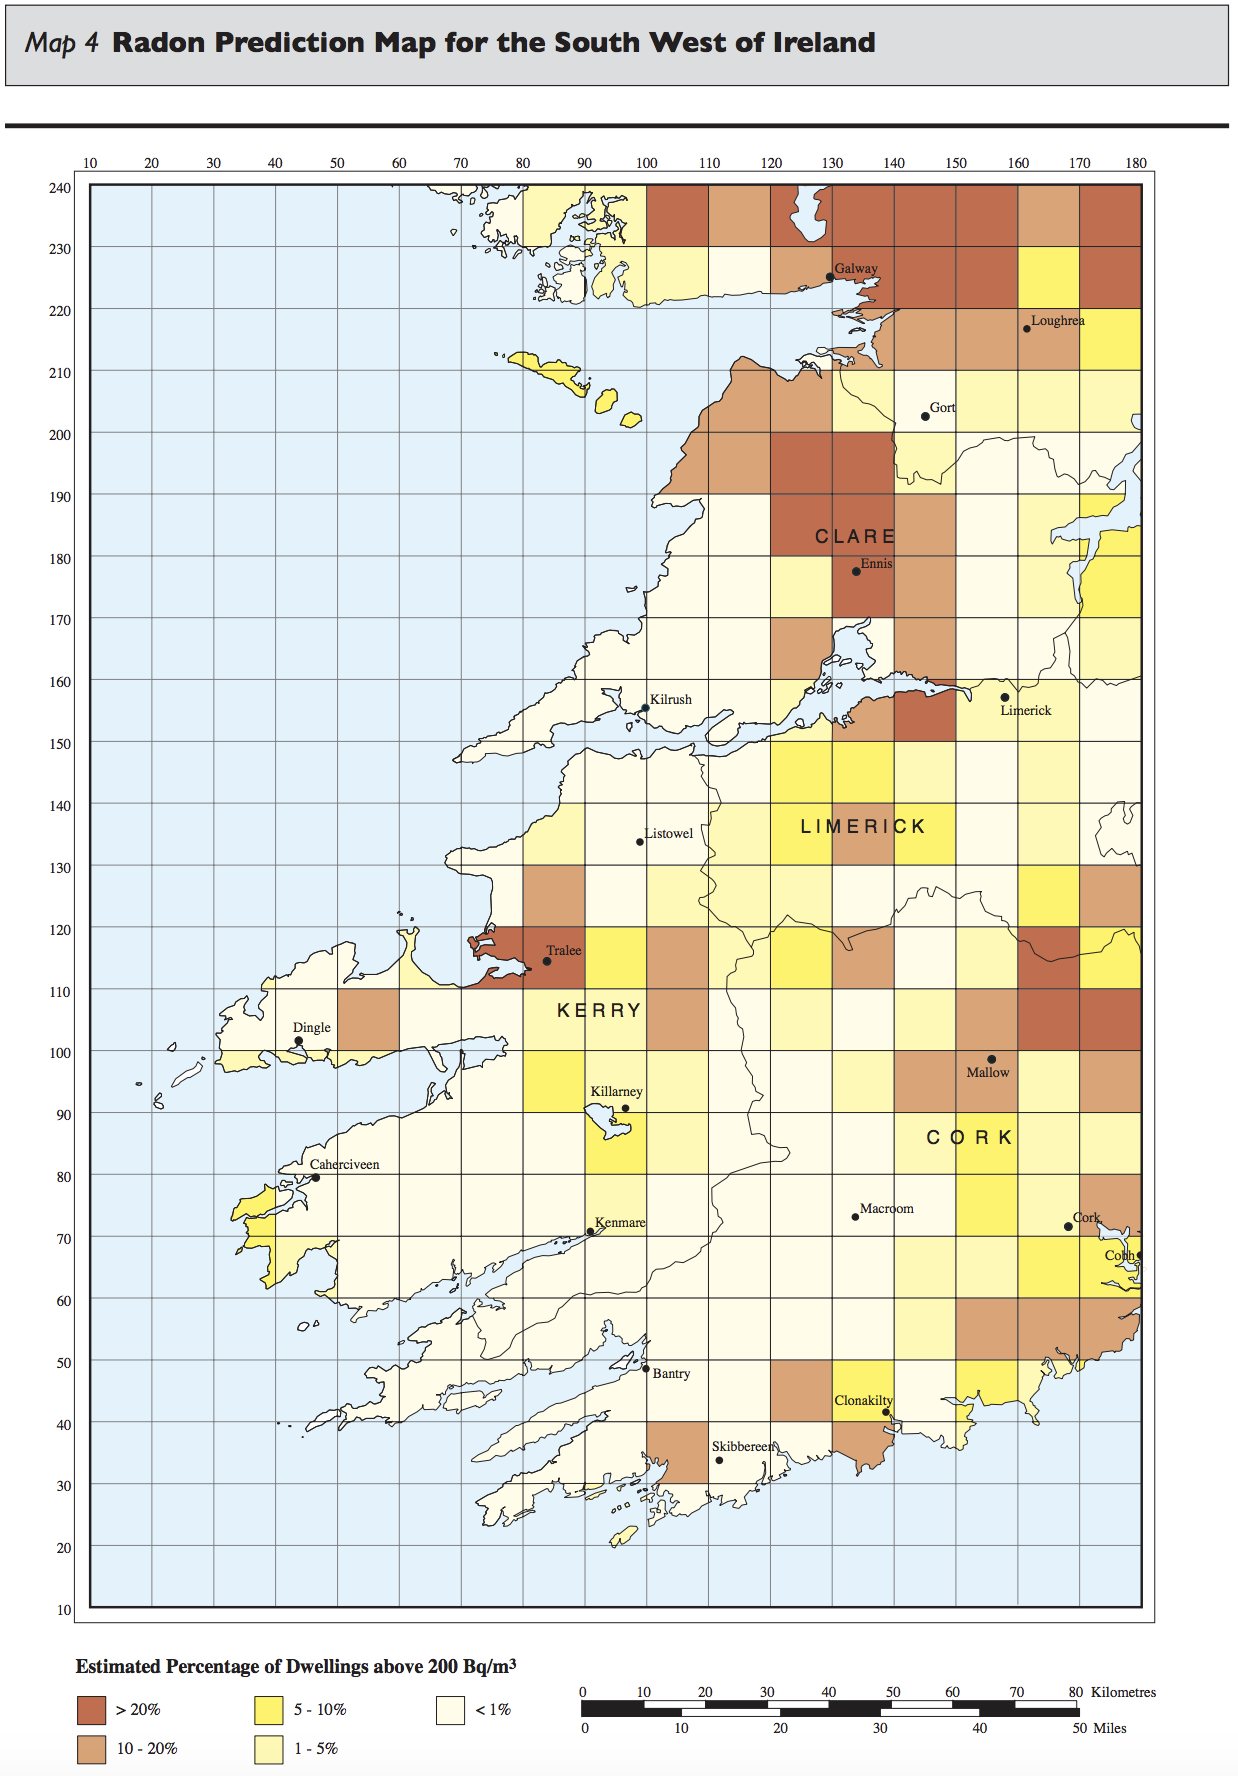 Diagram HC6 - Radon prediction map for the South West of Ireland - Extract from TGD C 